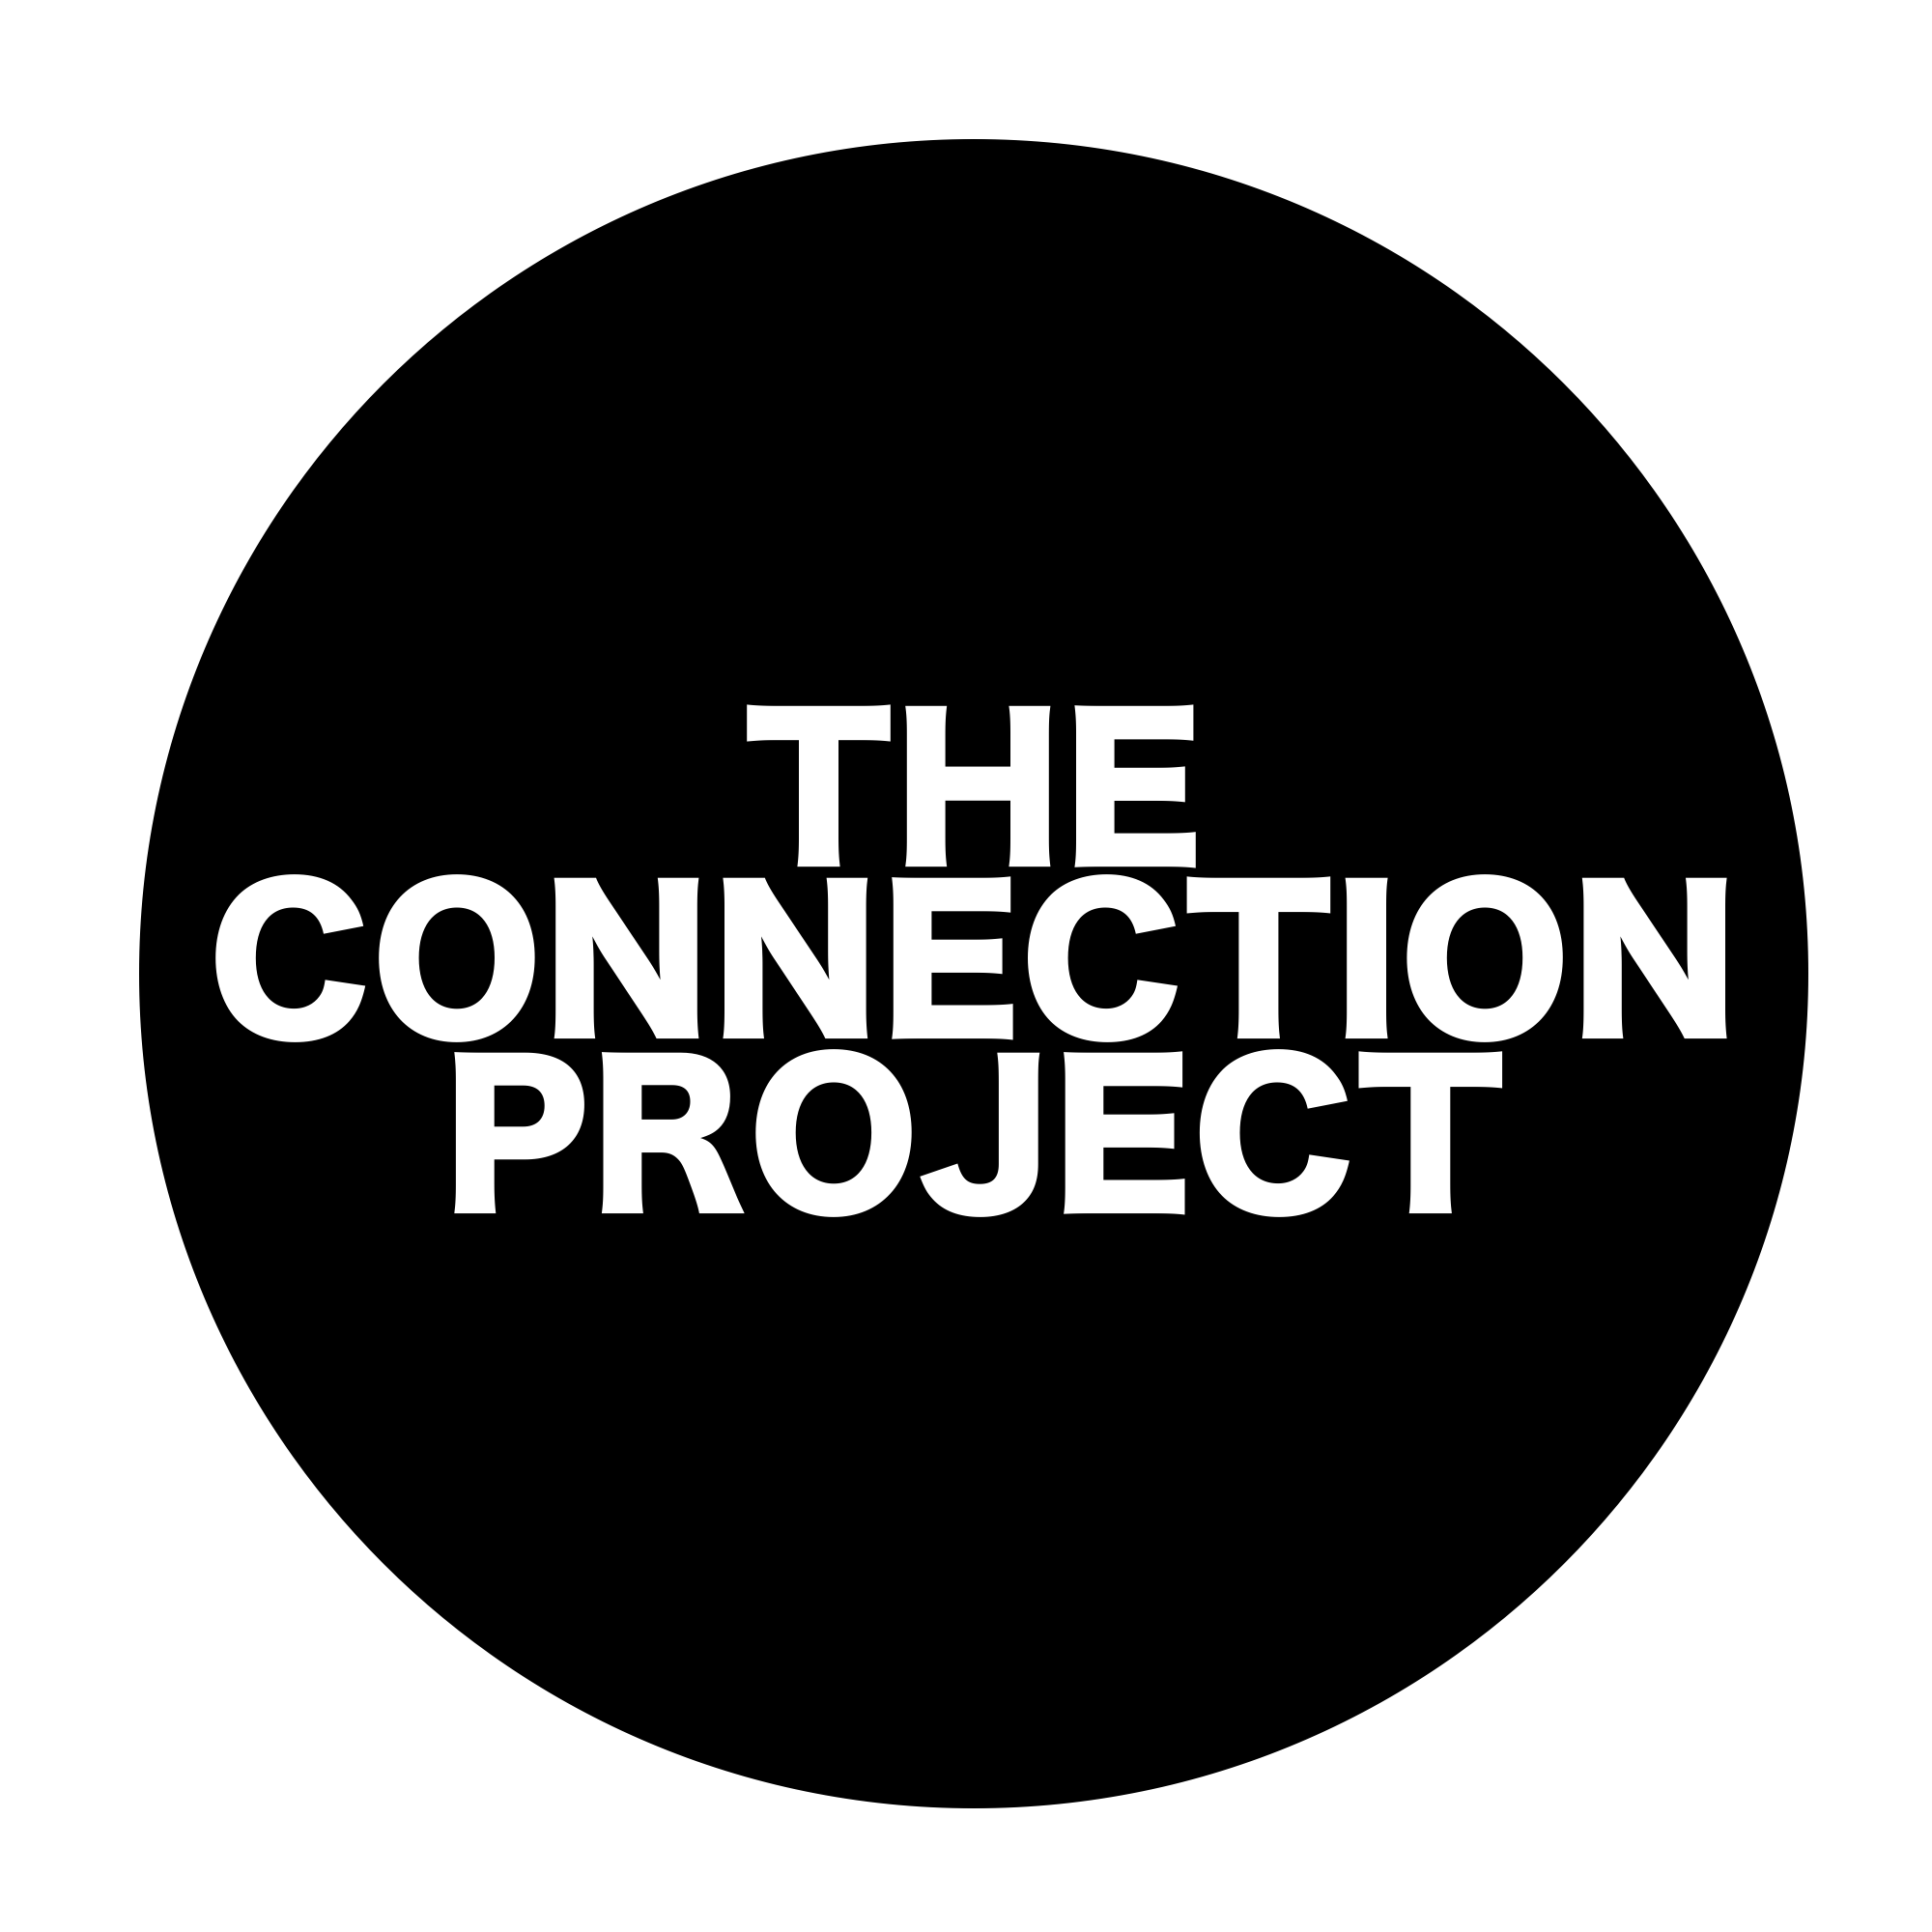 The Connection Project